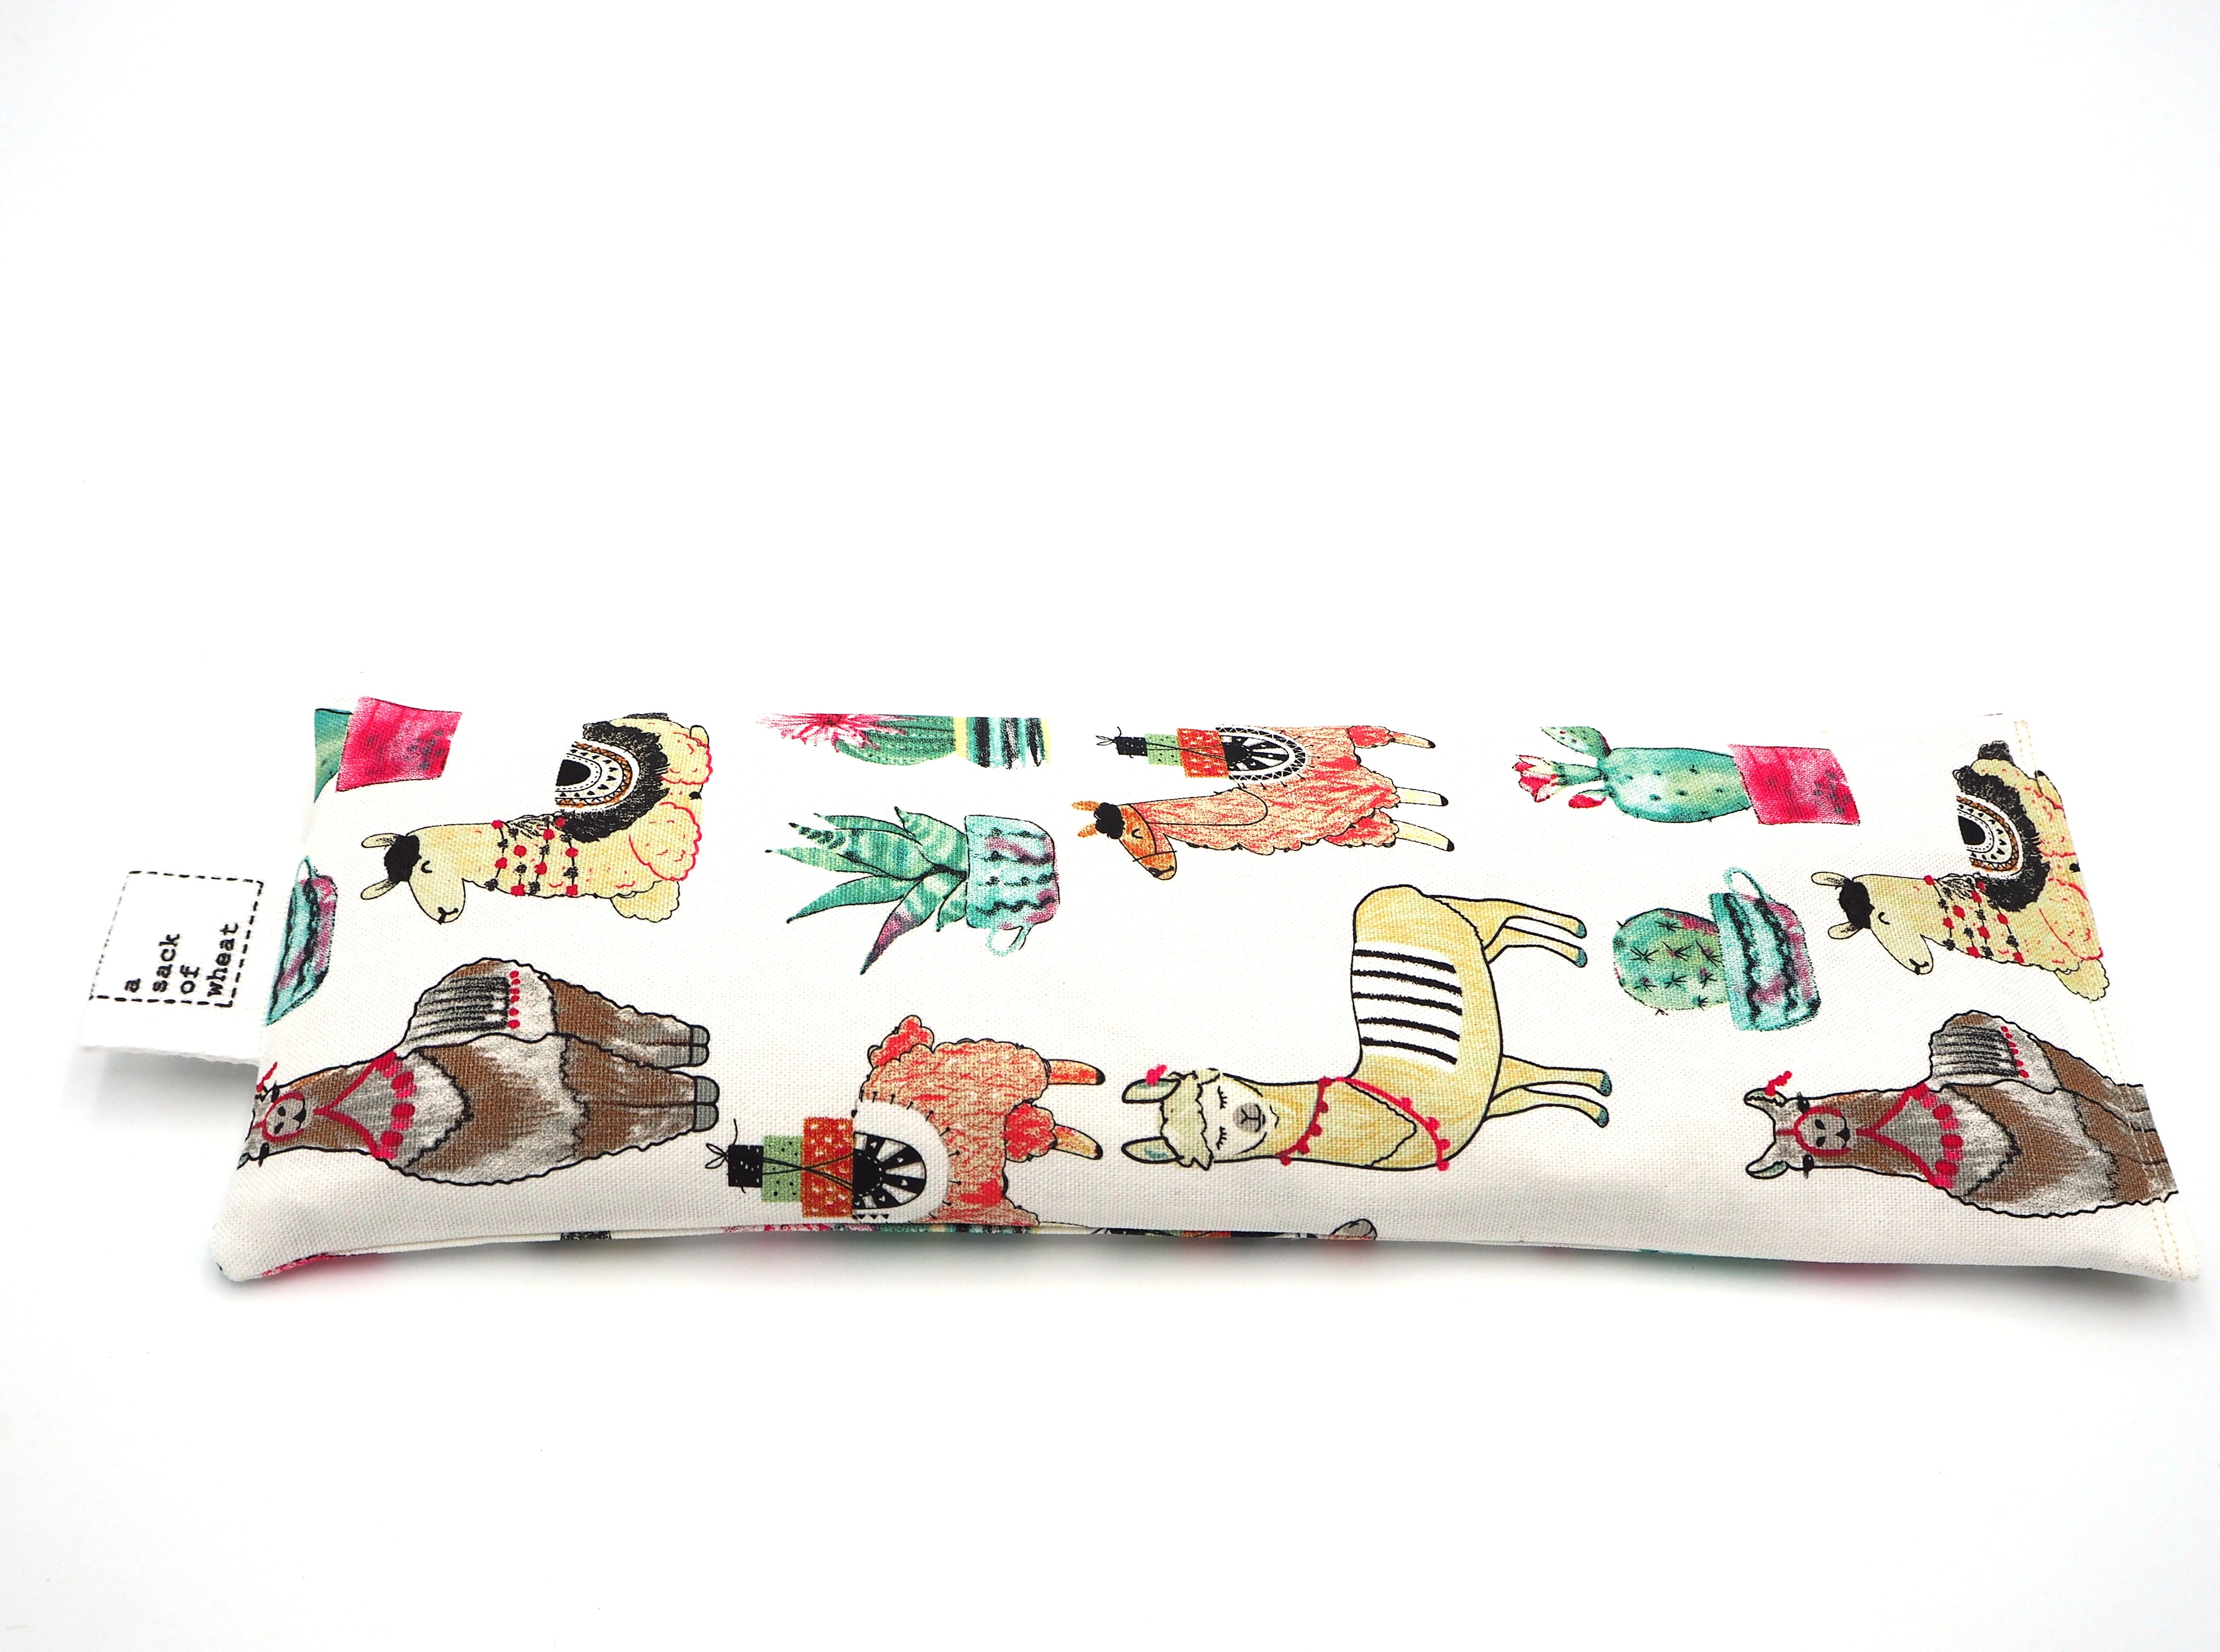 Flat Sack Of Wheat Image of Llamas dressed up in festive costumes on 100% cotton fabric